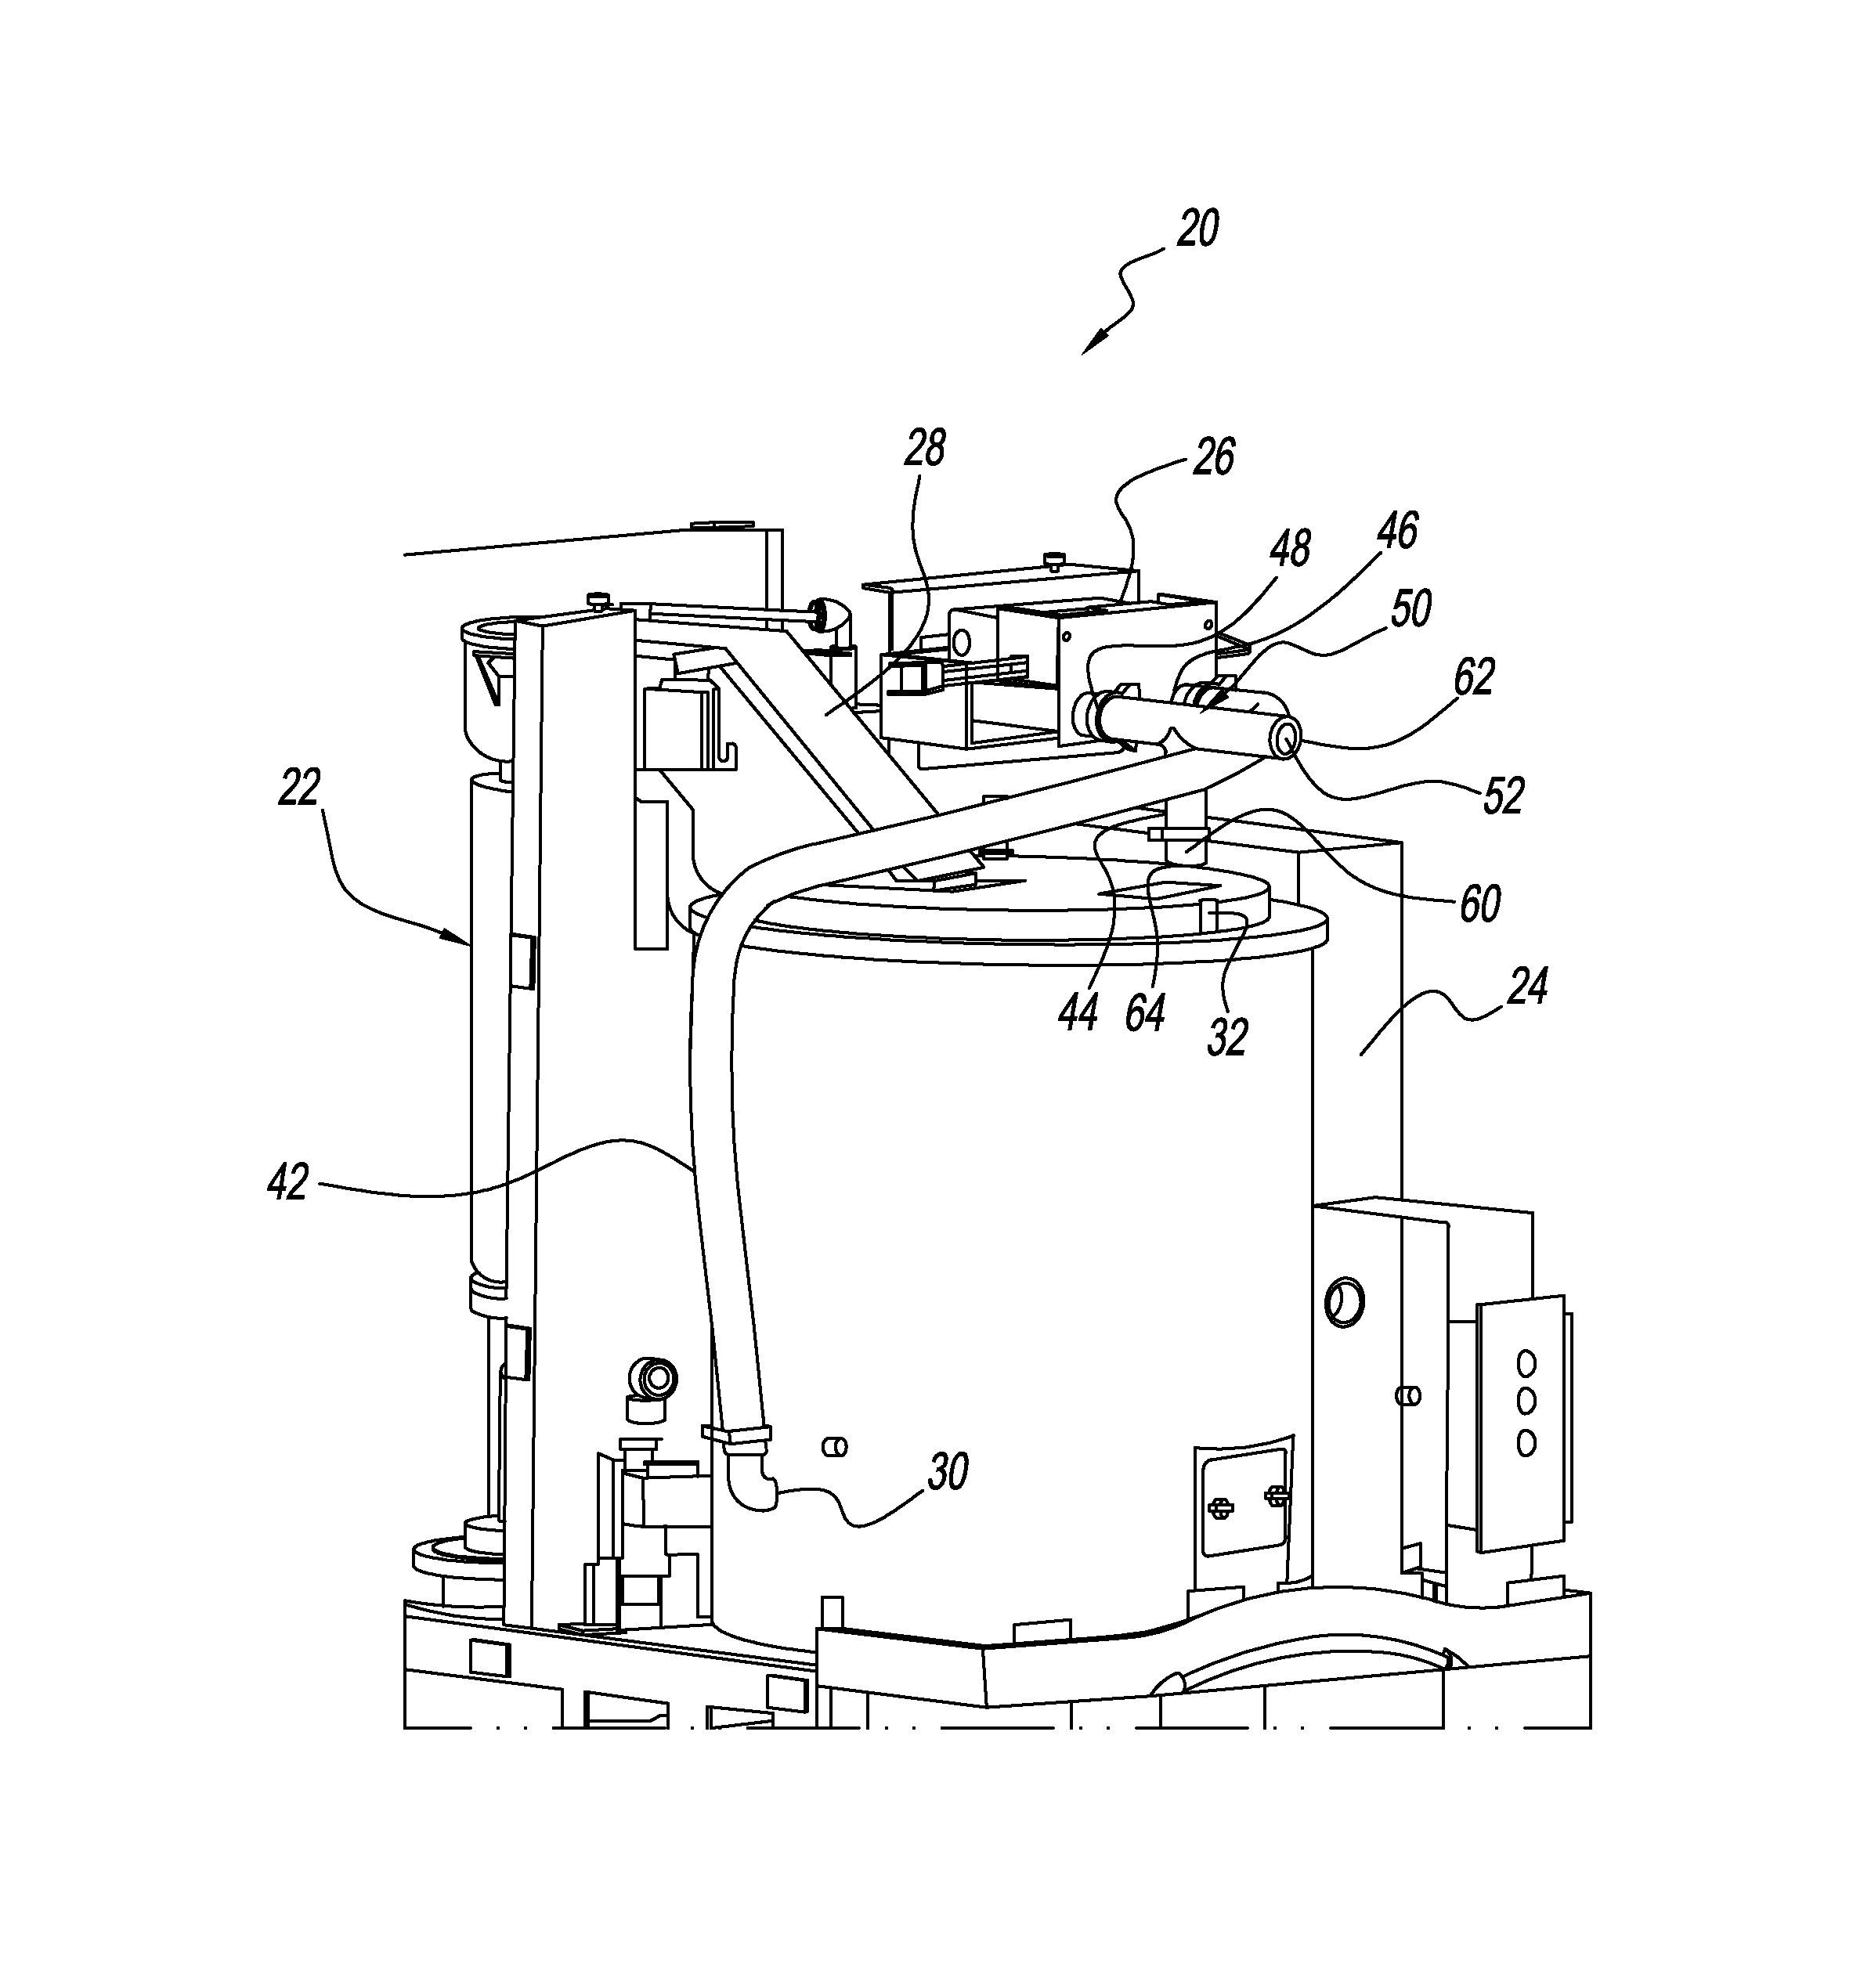 Sanitation system and method for ice storage and dispensing equipment